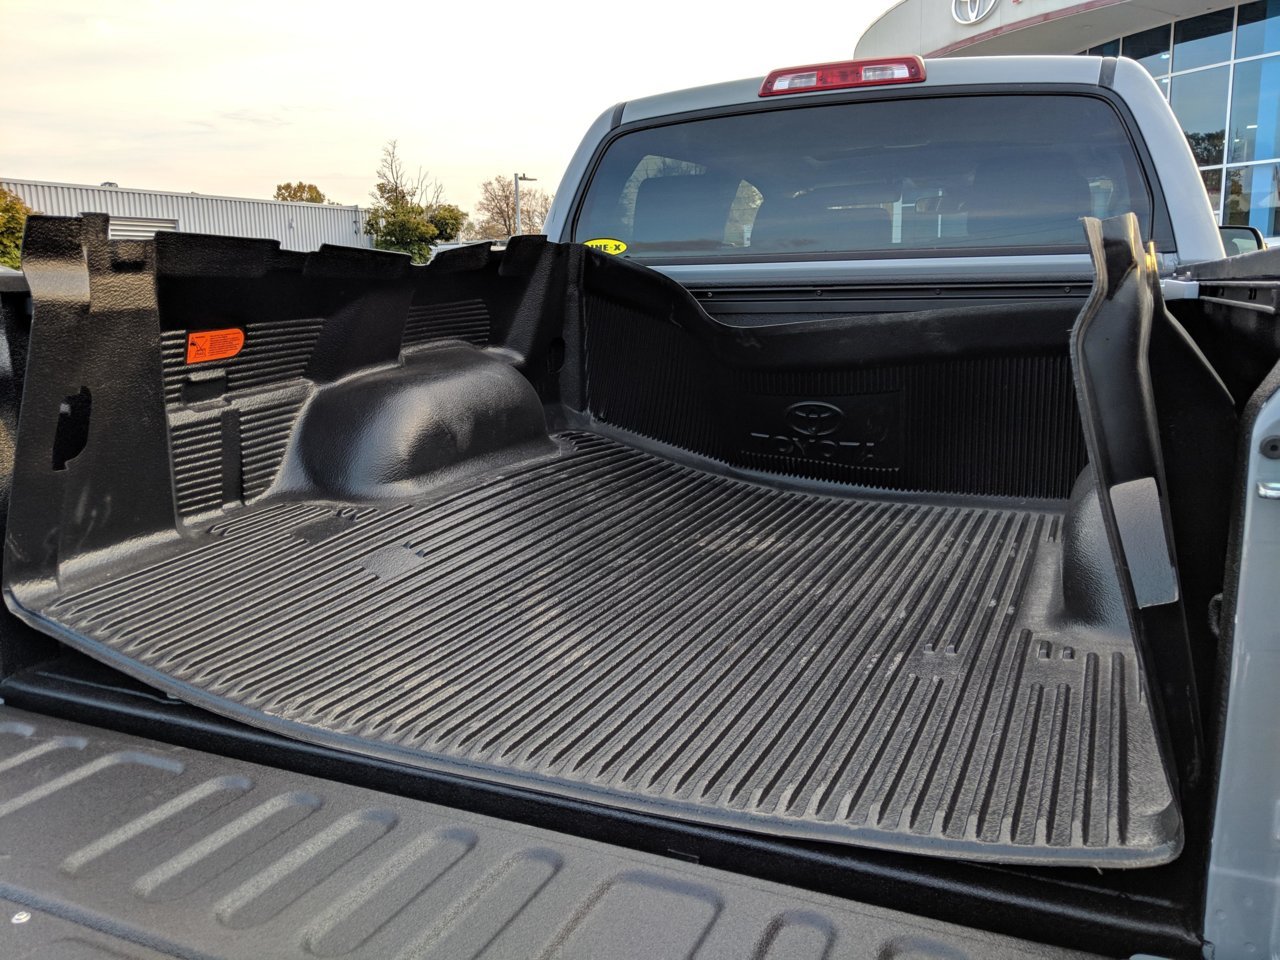 For Sale: Tundra Drop-In Bed Liner 2018 | Toyota Tundra Forum